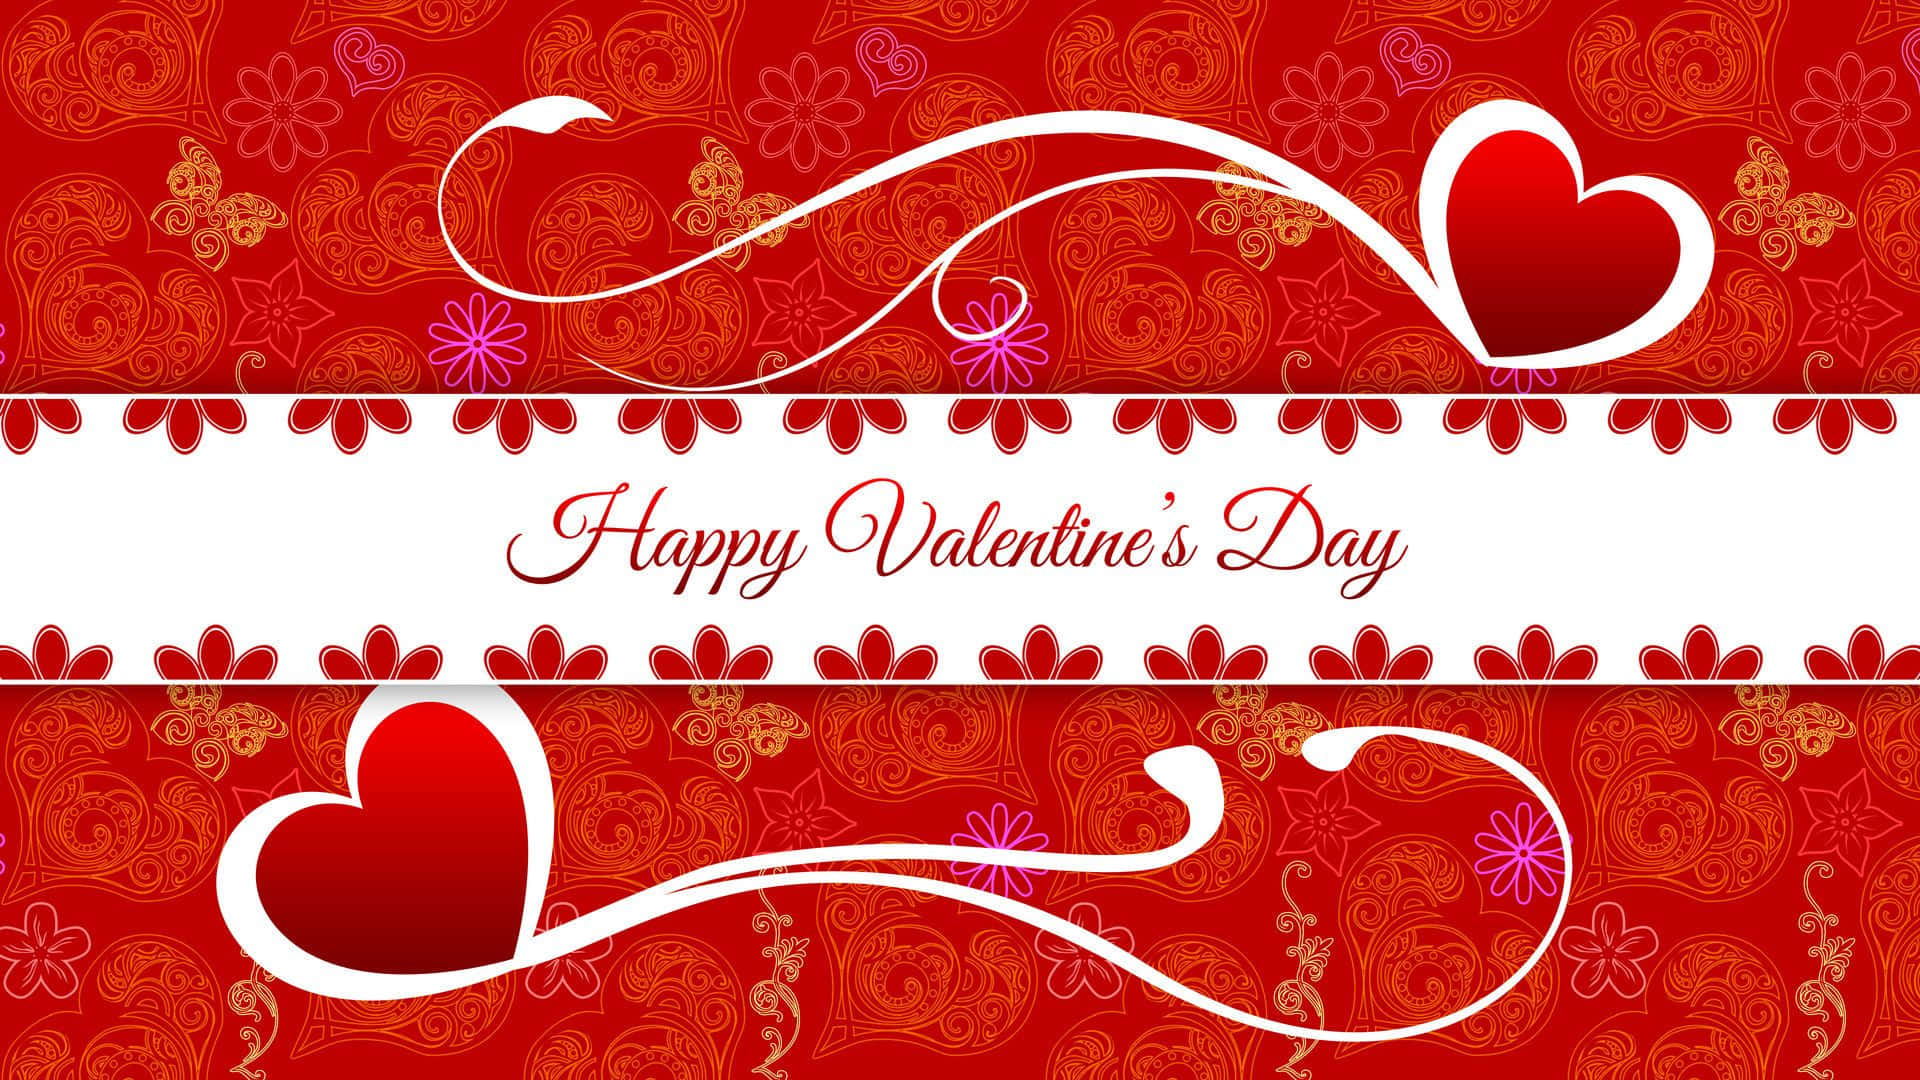 Two Large Hearts Happy Valentines Day Background